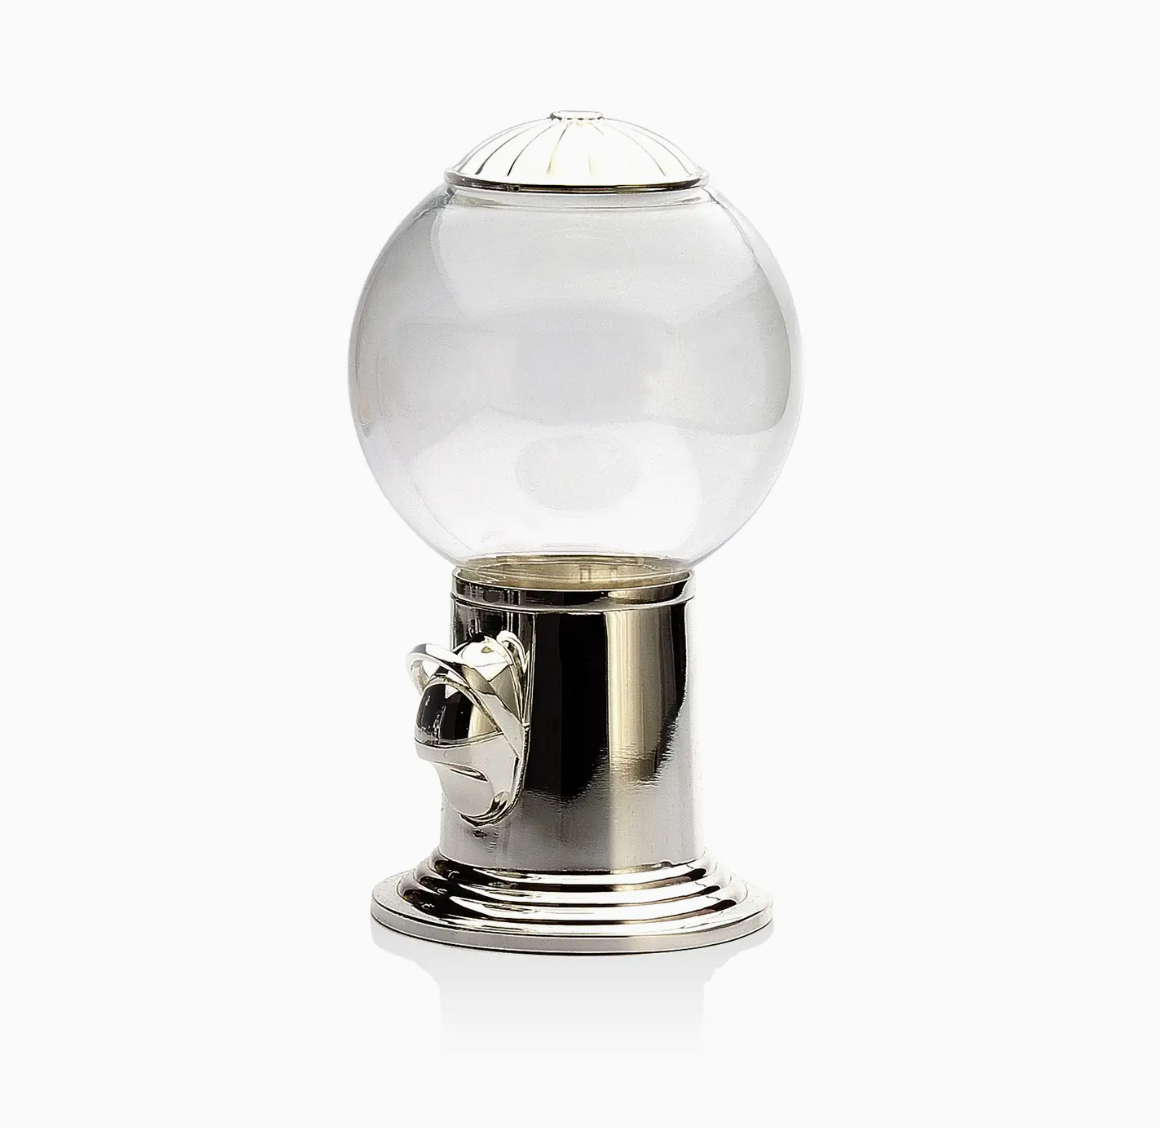 An elegant, shiny silver Godinger candy dispenser with a transparent glass globe on a white background.